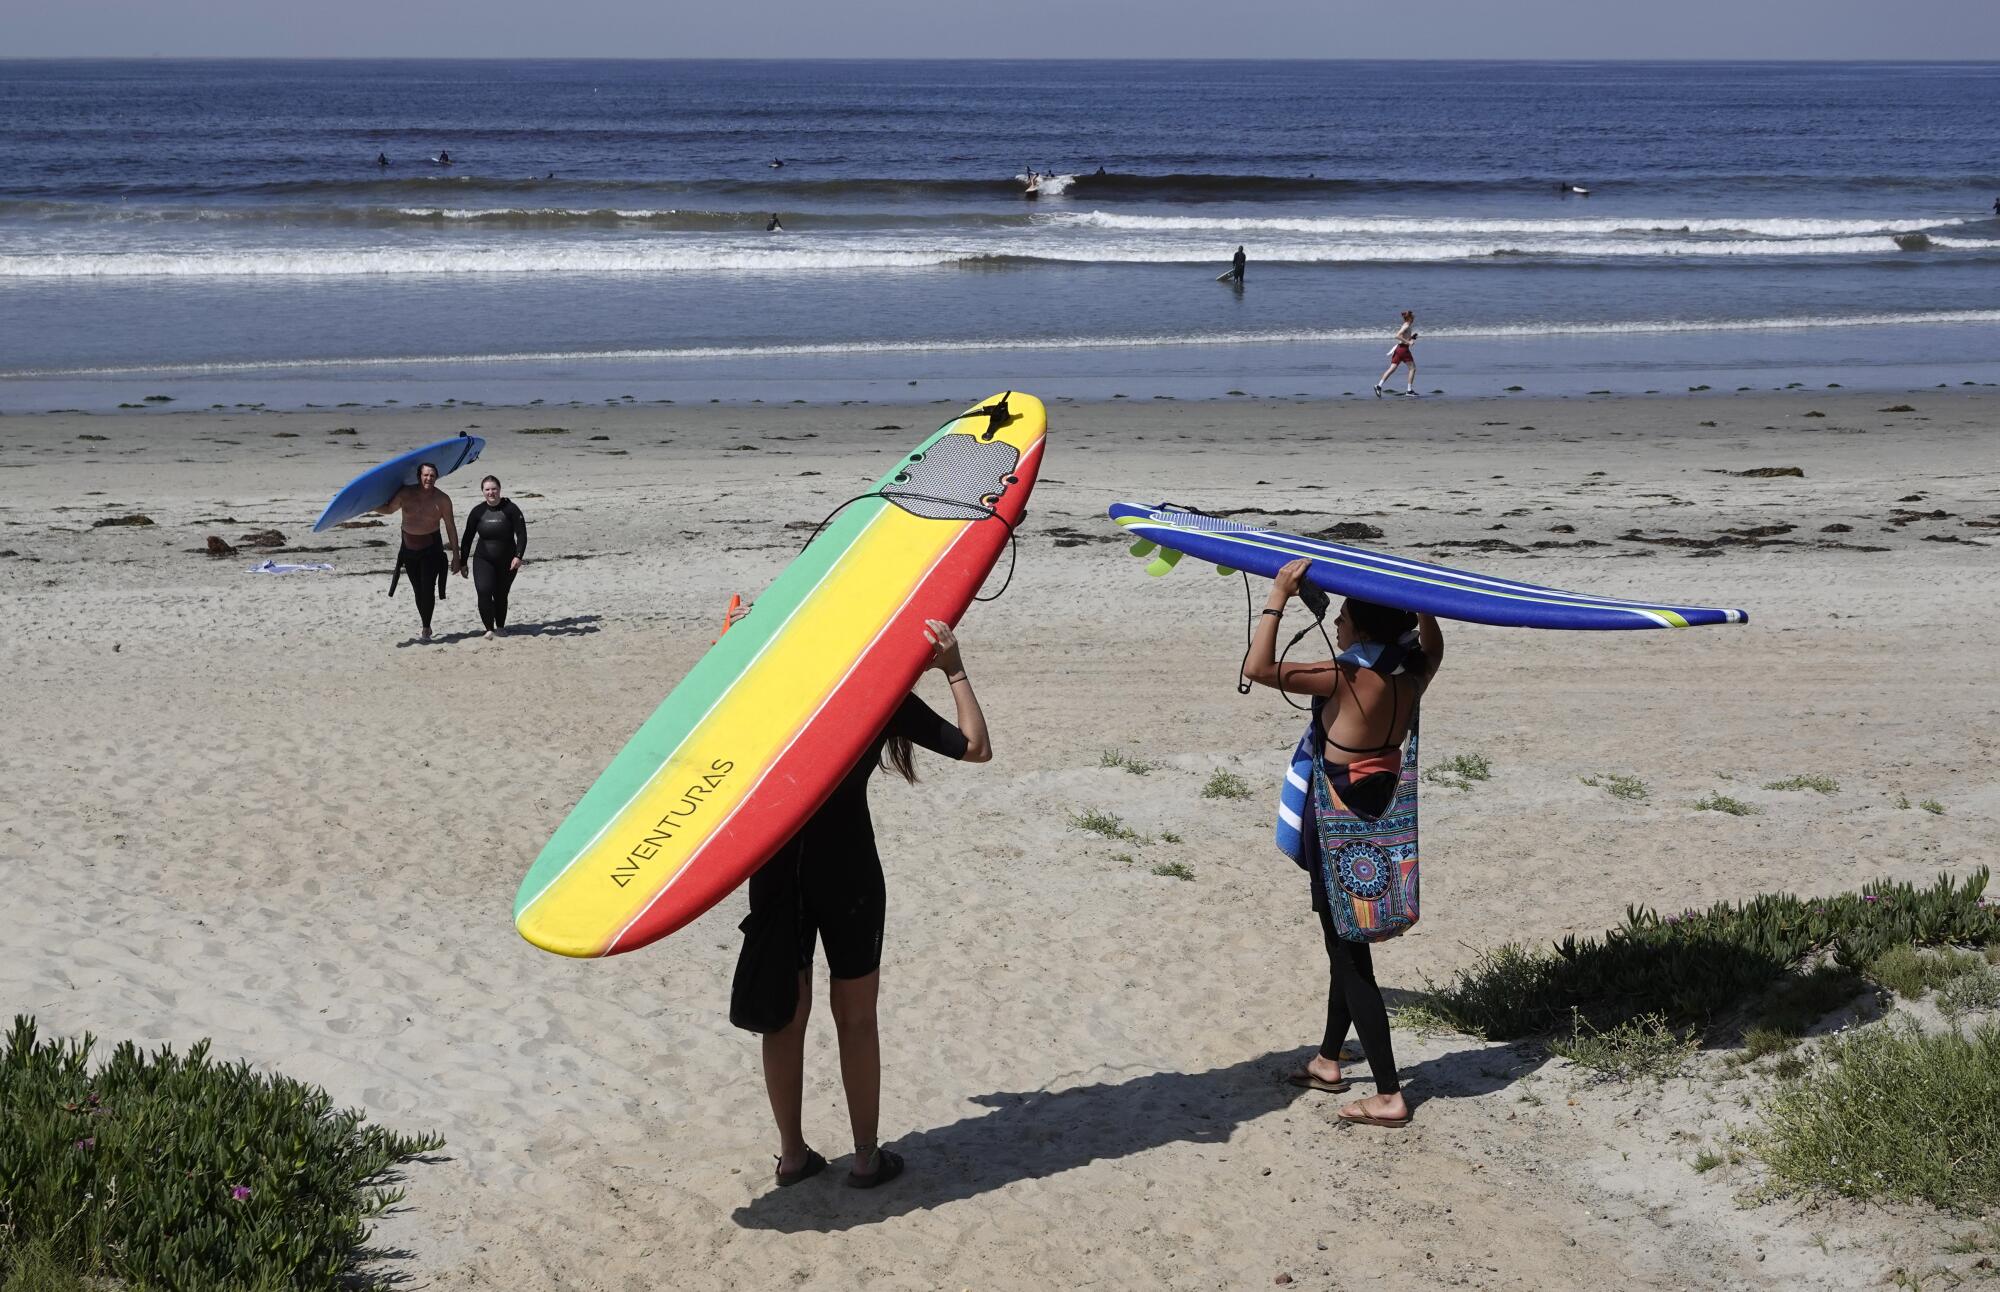 Andrea Lizardi, left, and Angeli Ruvalcaba walk to surf in Pacific Beach after local beaches reopened to activities such as walking, running, and surfing on April 27, 2020. Beaches have been closed for several weeks due to the coronavirus.